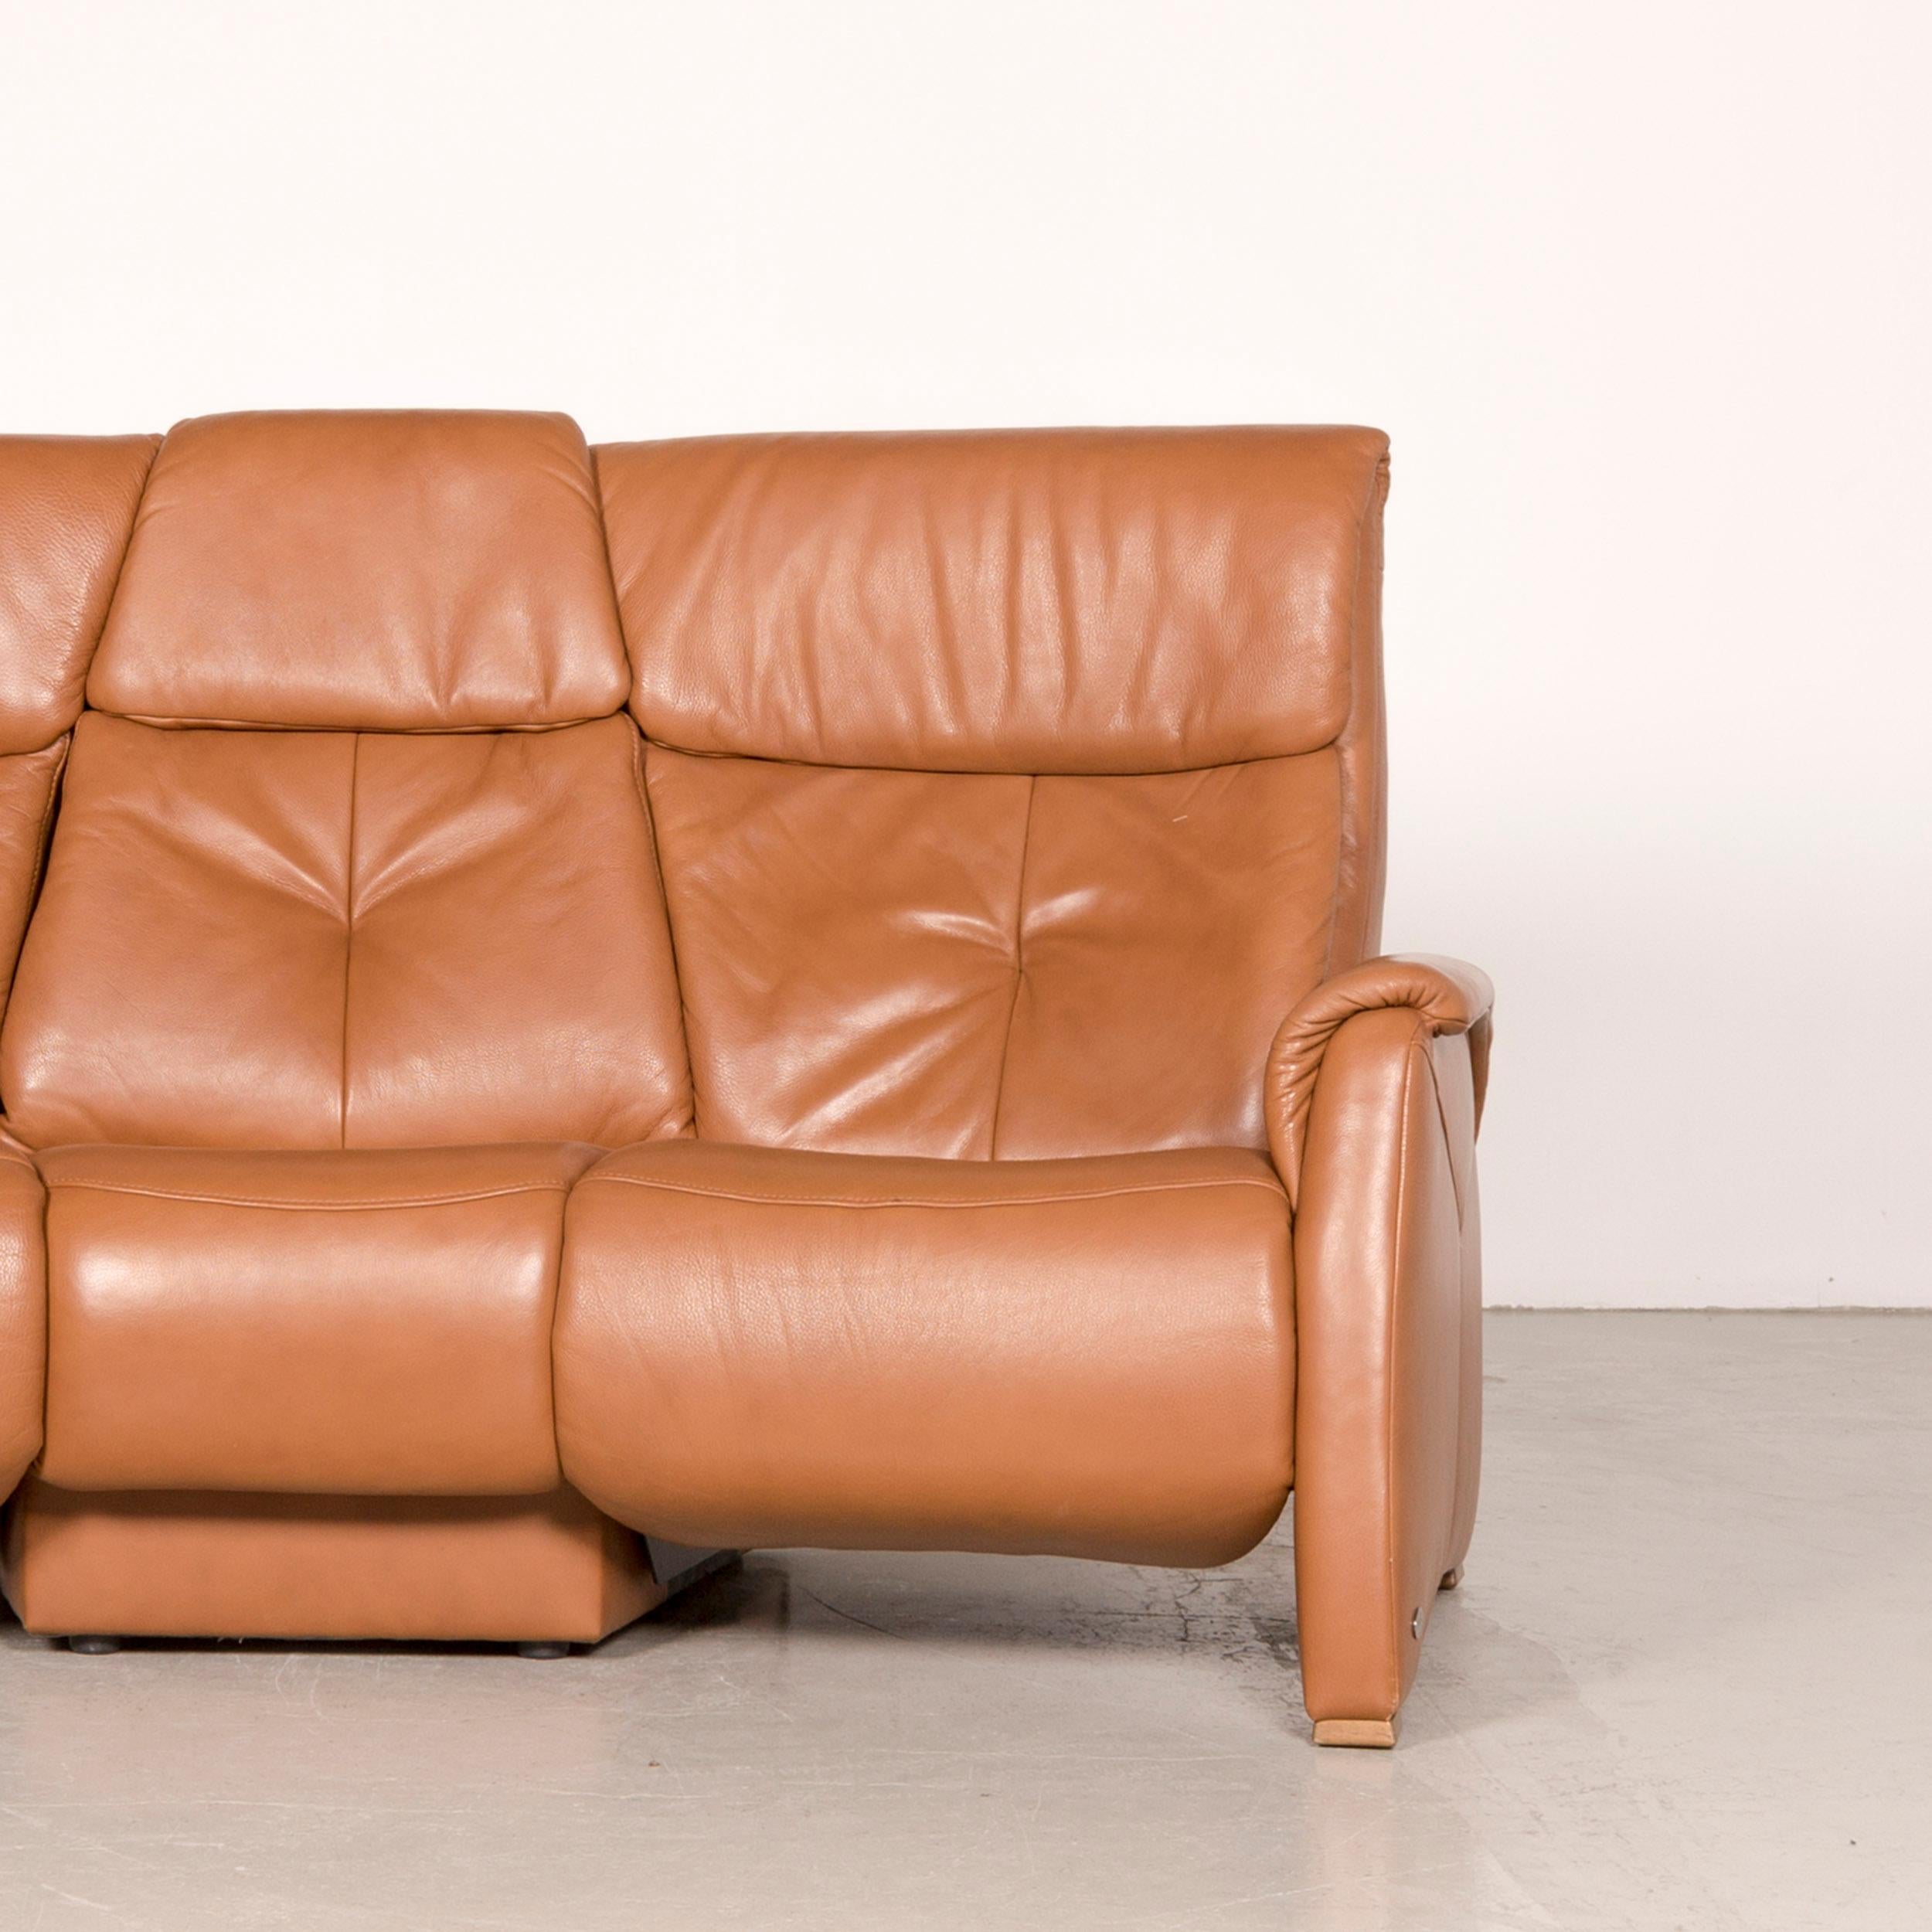 Contemporary Himolla Designer Sofa Brown Leather Three-Seat Couch Recliner Function For Sale